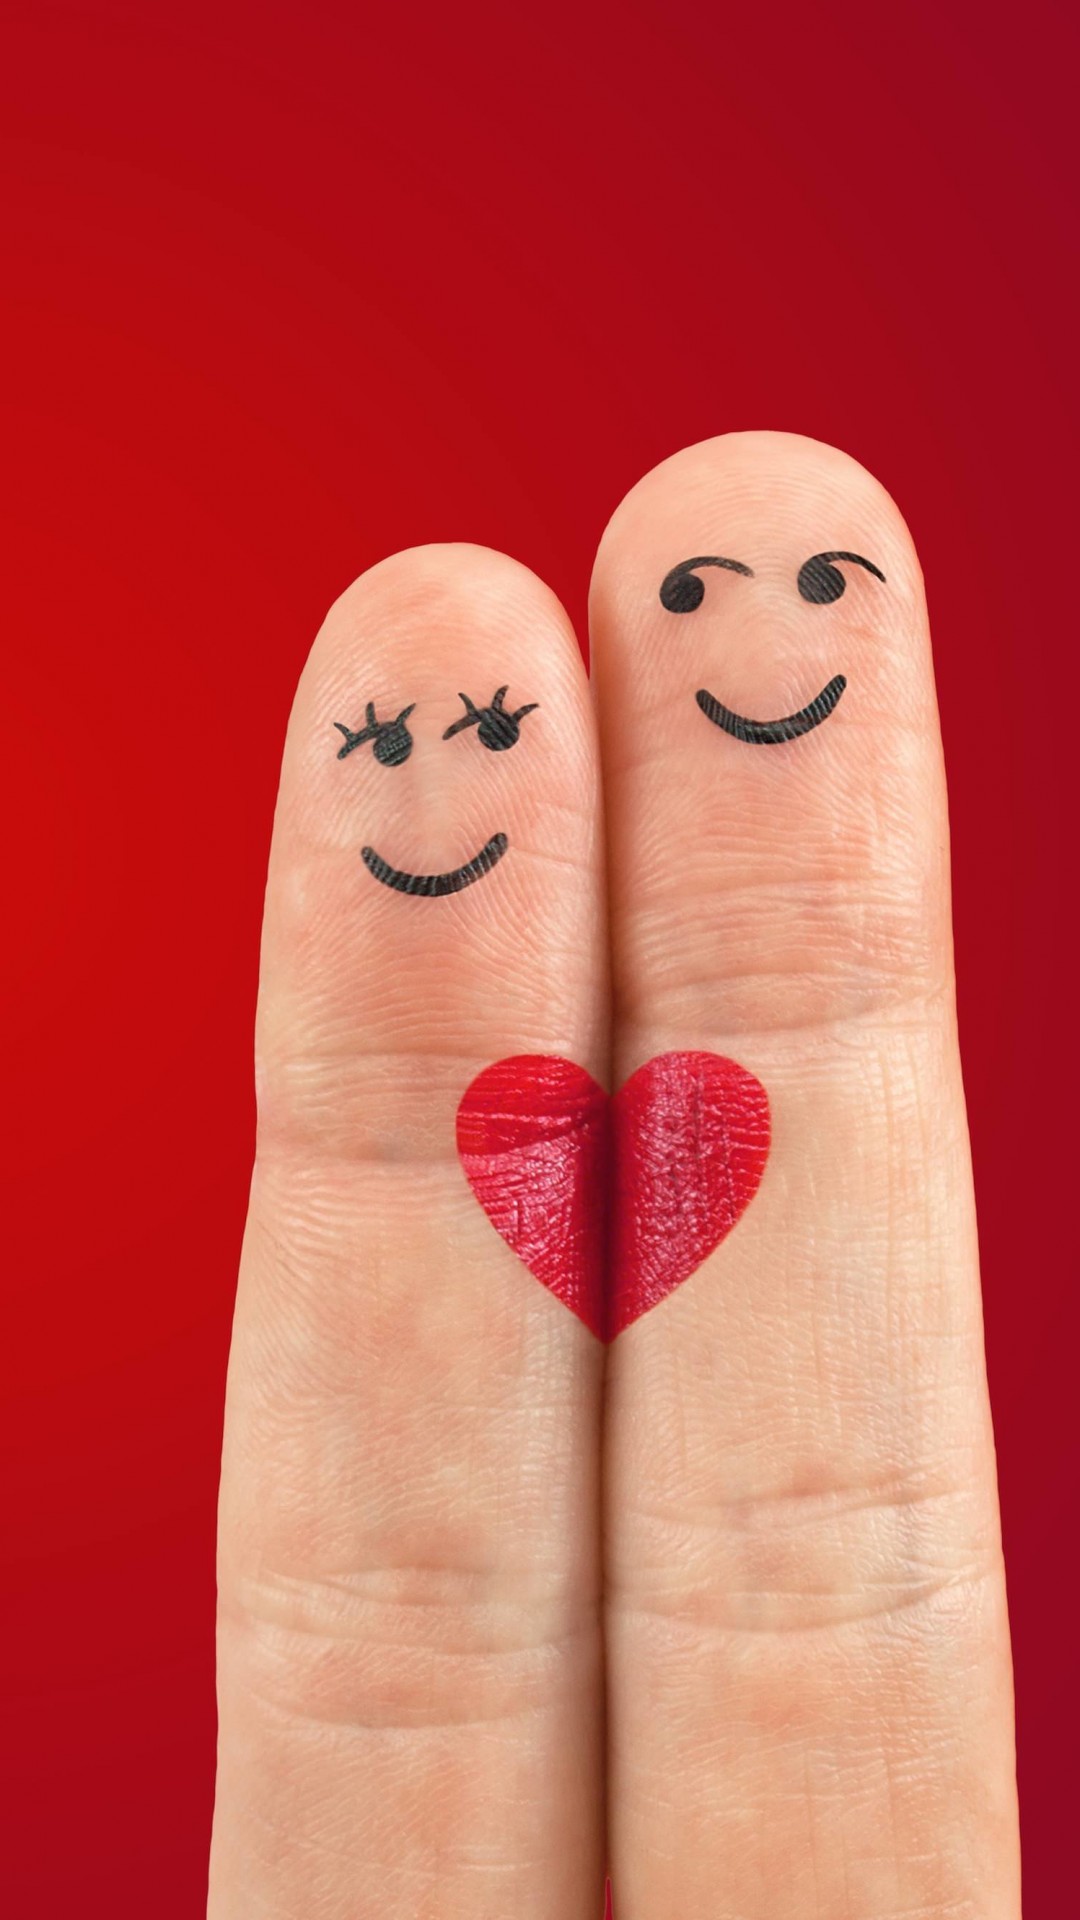 Fingers in Love Wallpaper for HTC One